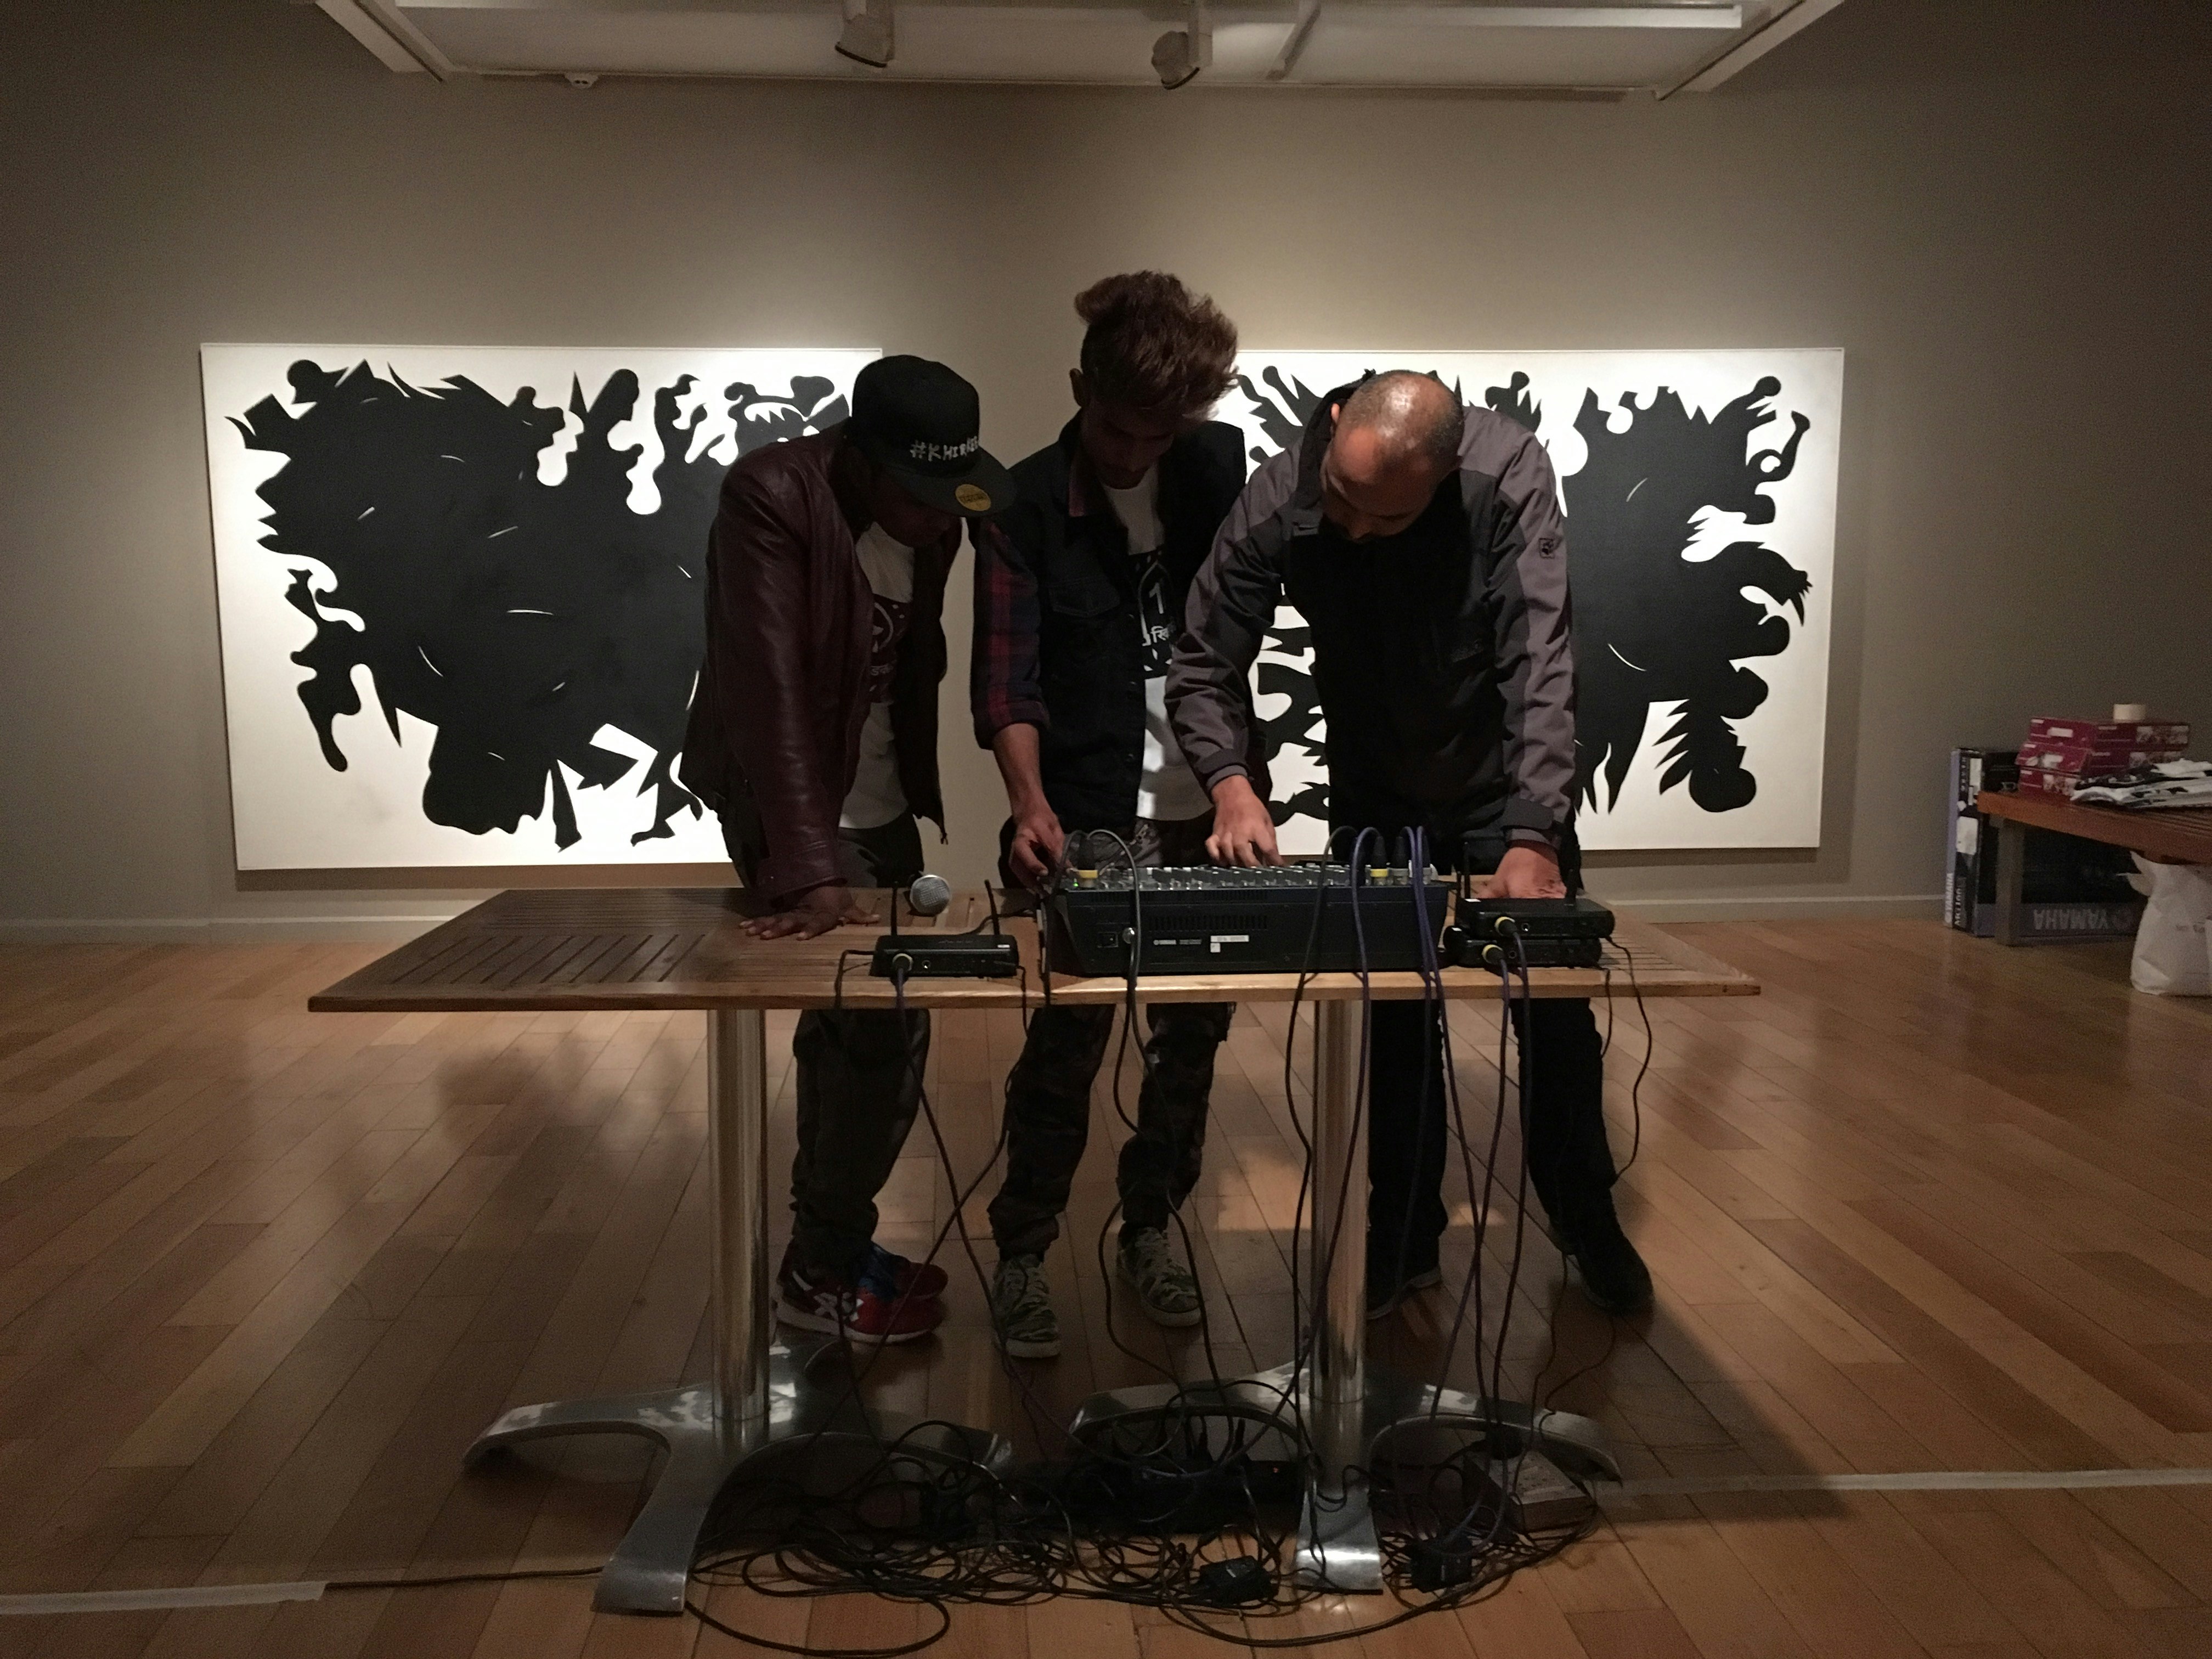 Three male-presenting figures stand in an art gallery, looking over a sound board. Behind them are two large white canvases painted with black shapes.